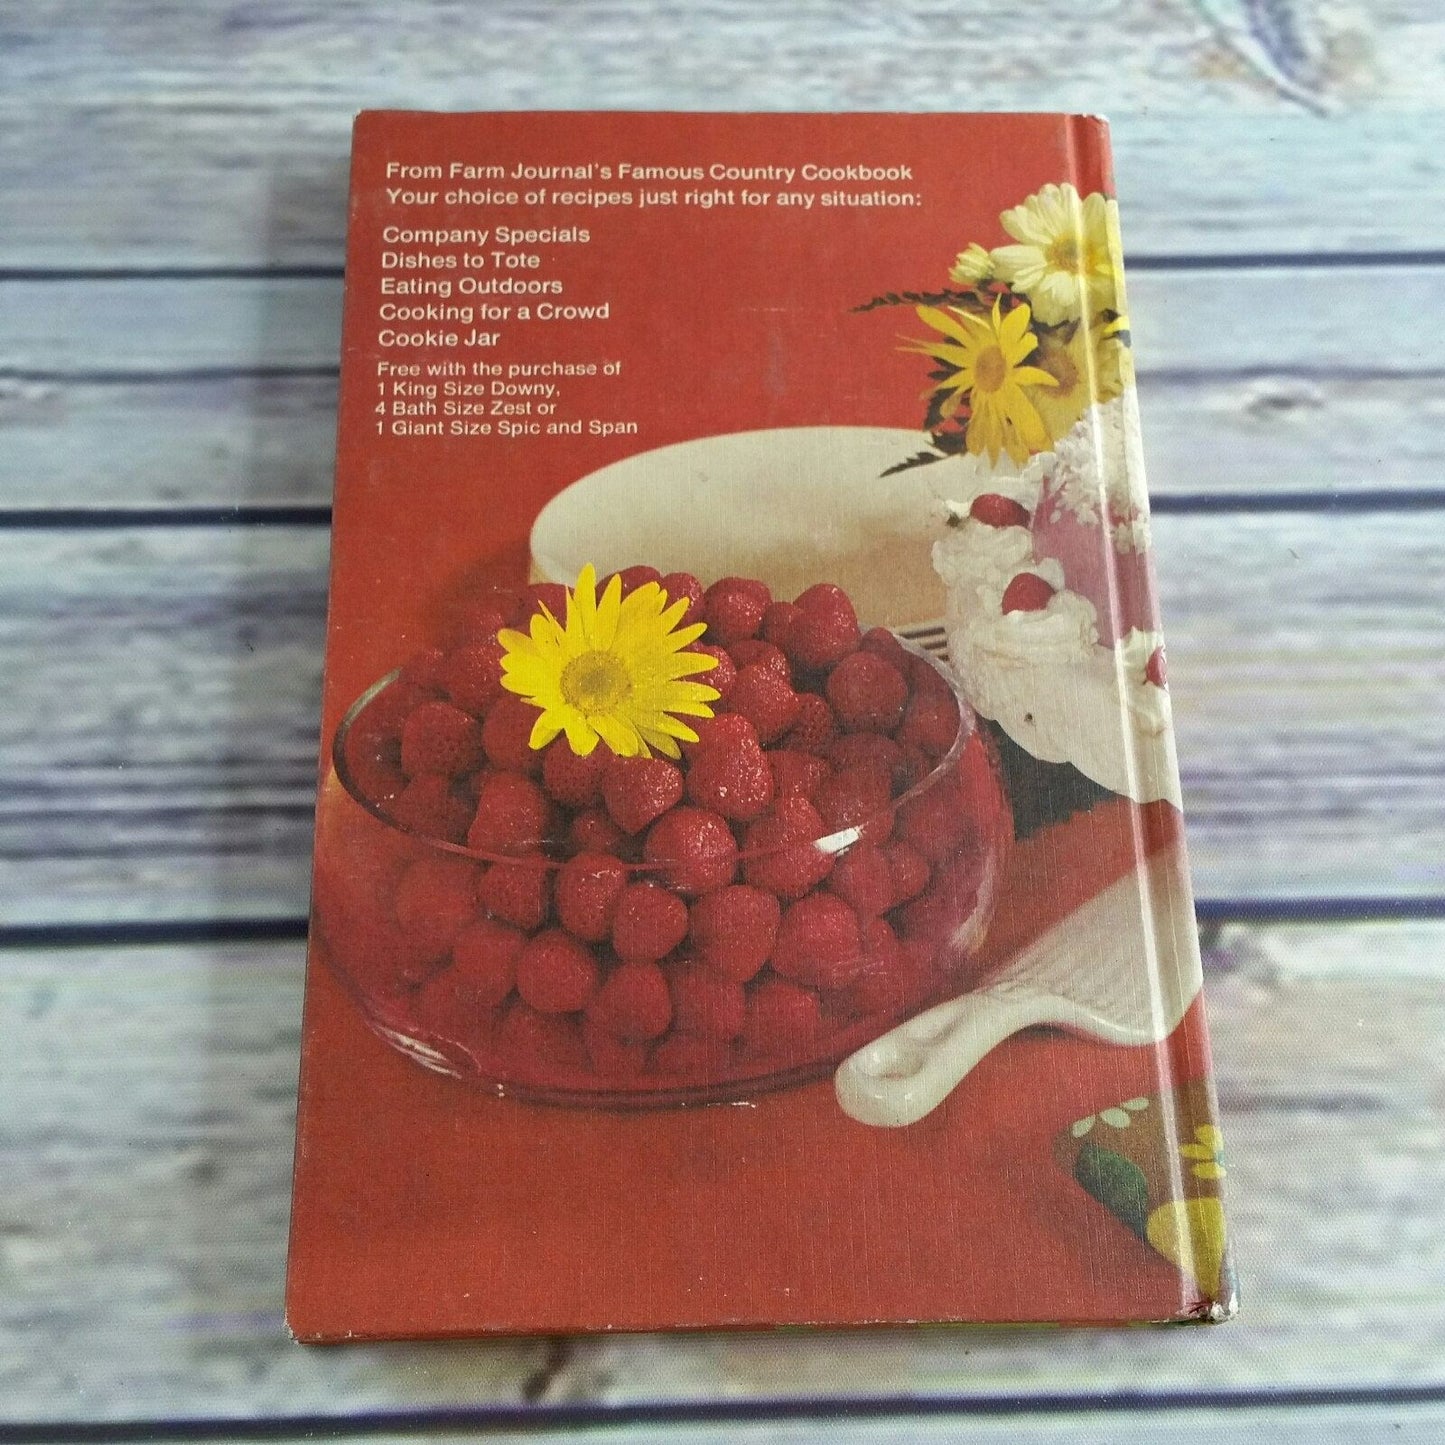 Vintage Farm Journal Famous Country Cookbook 1971 NO Dust Jacket Hardcover Hospitality Cooking